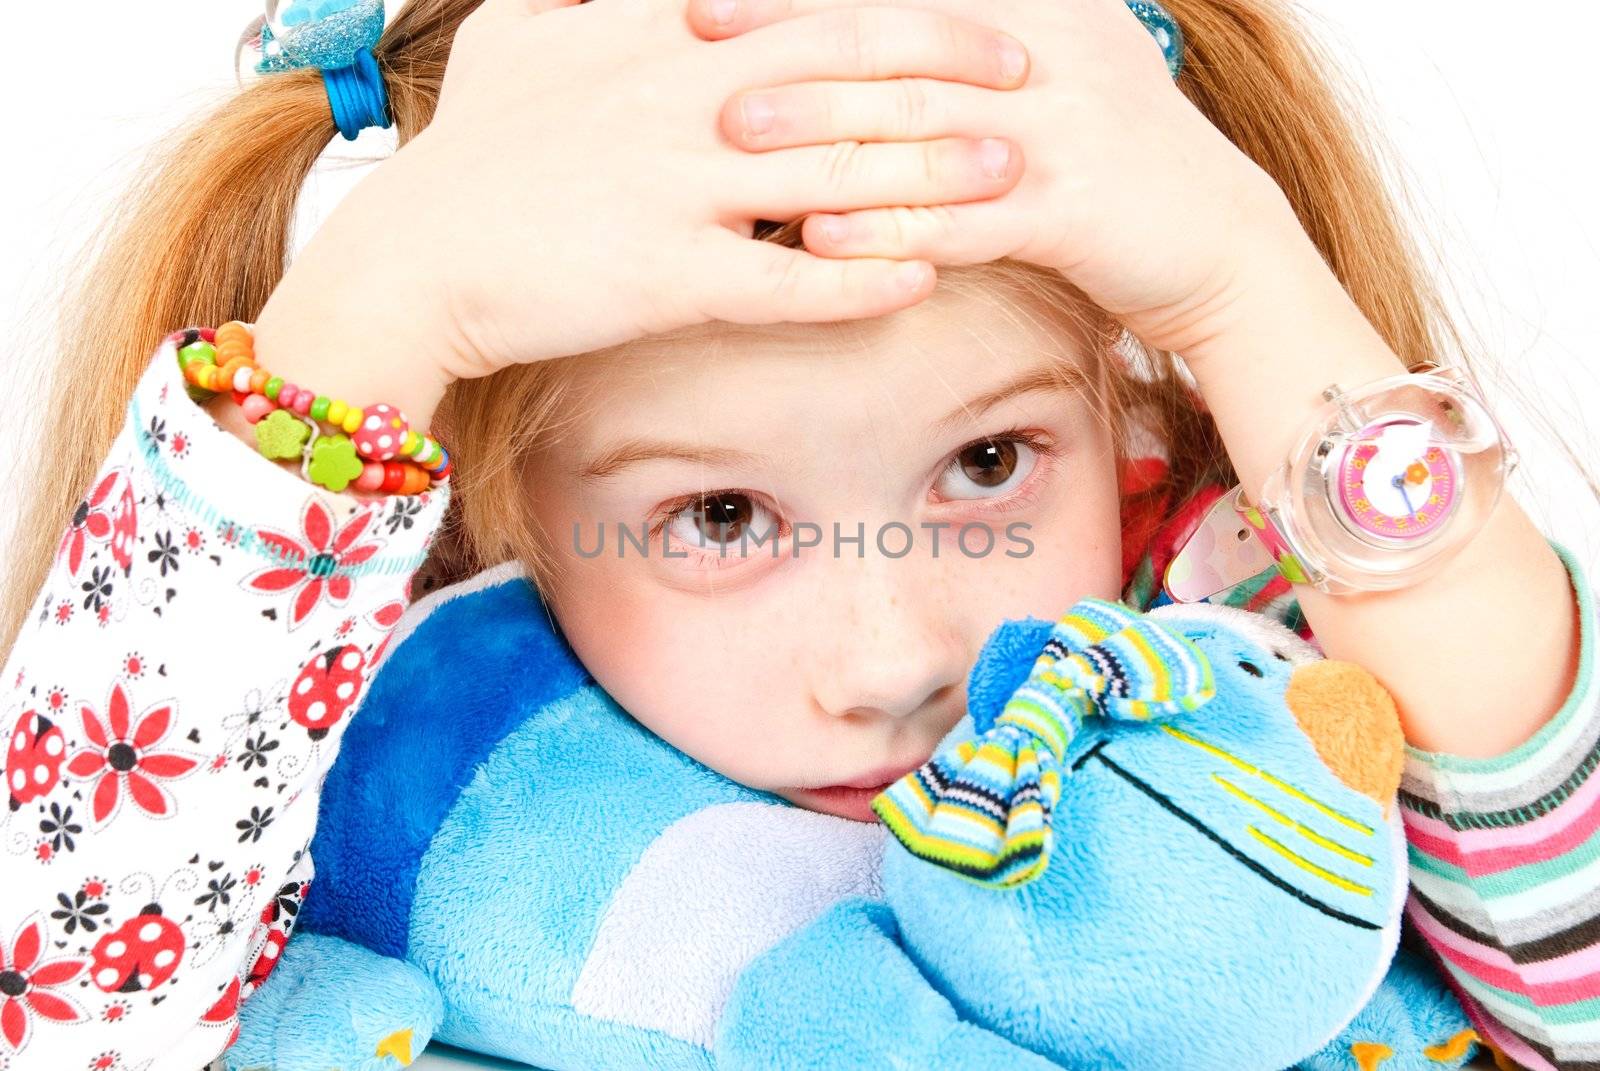 studio shot of sad pretty little girl with blue cat toy